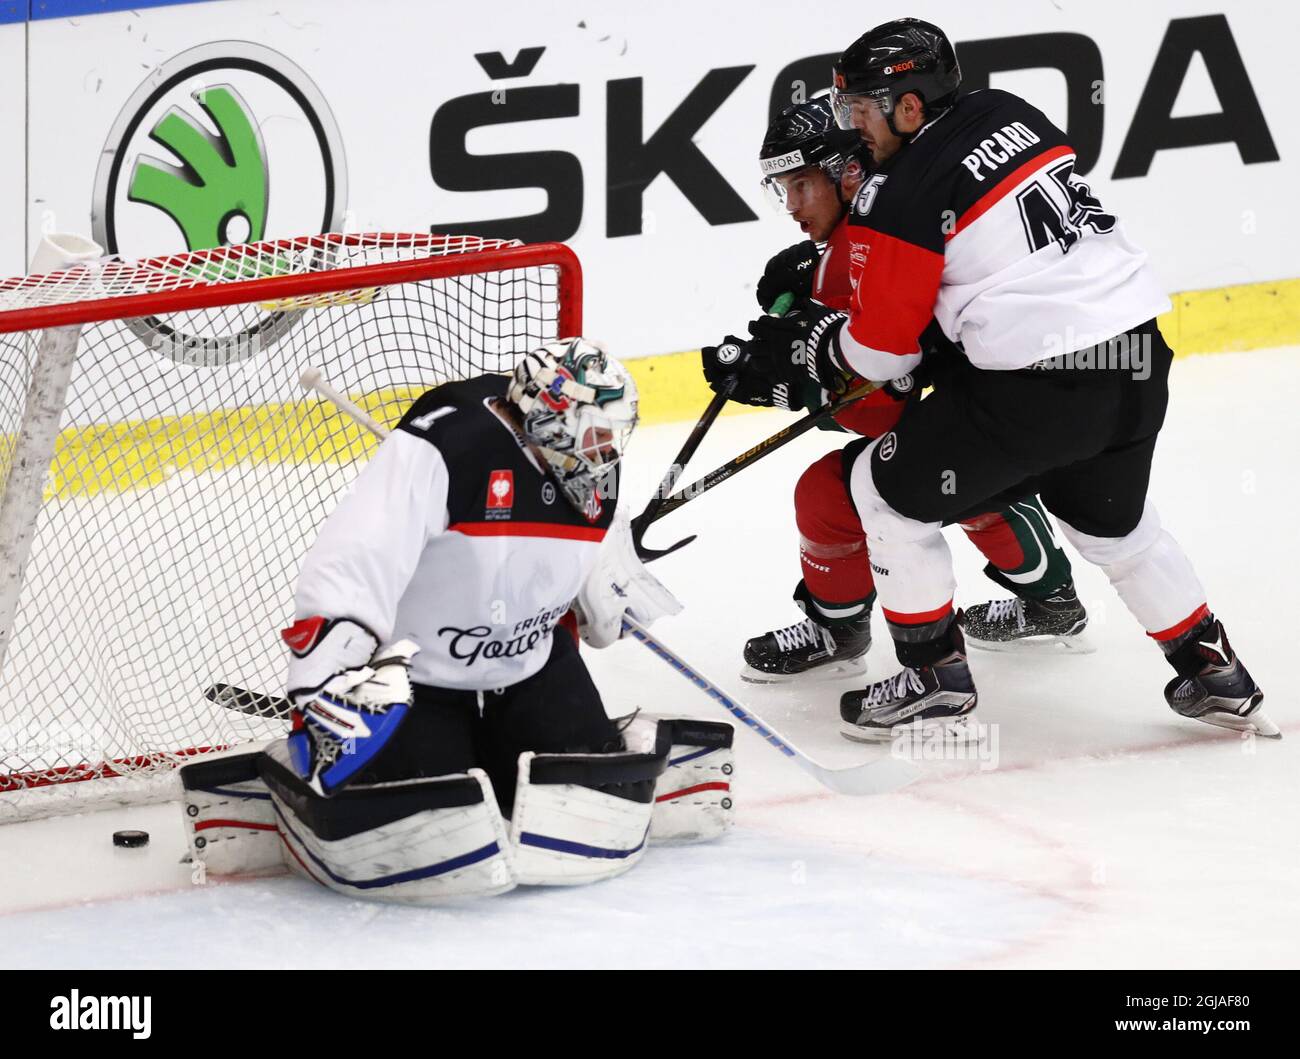 Henrik Tommernes (C) of Frolunda, chased by Alexandre Picard (R) of Fribourg-Gotterons, just scored the 3-1 goal at Fribourg-Gotterons goalkeeper Benjamin Conz (L) during the Champions Hockey League semifinal match between Swedish Frolunda HC and HC Fribourg-Gotteron at Frolundaborgs Isstadion in Gothenburg, Sweden, on Jan. 10, 2017. Photo: Thomas Johansson / TT / code 9200  Stock Photo